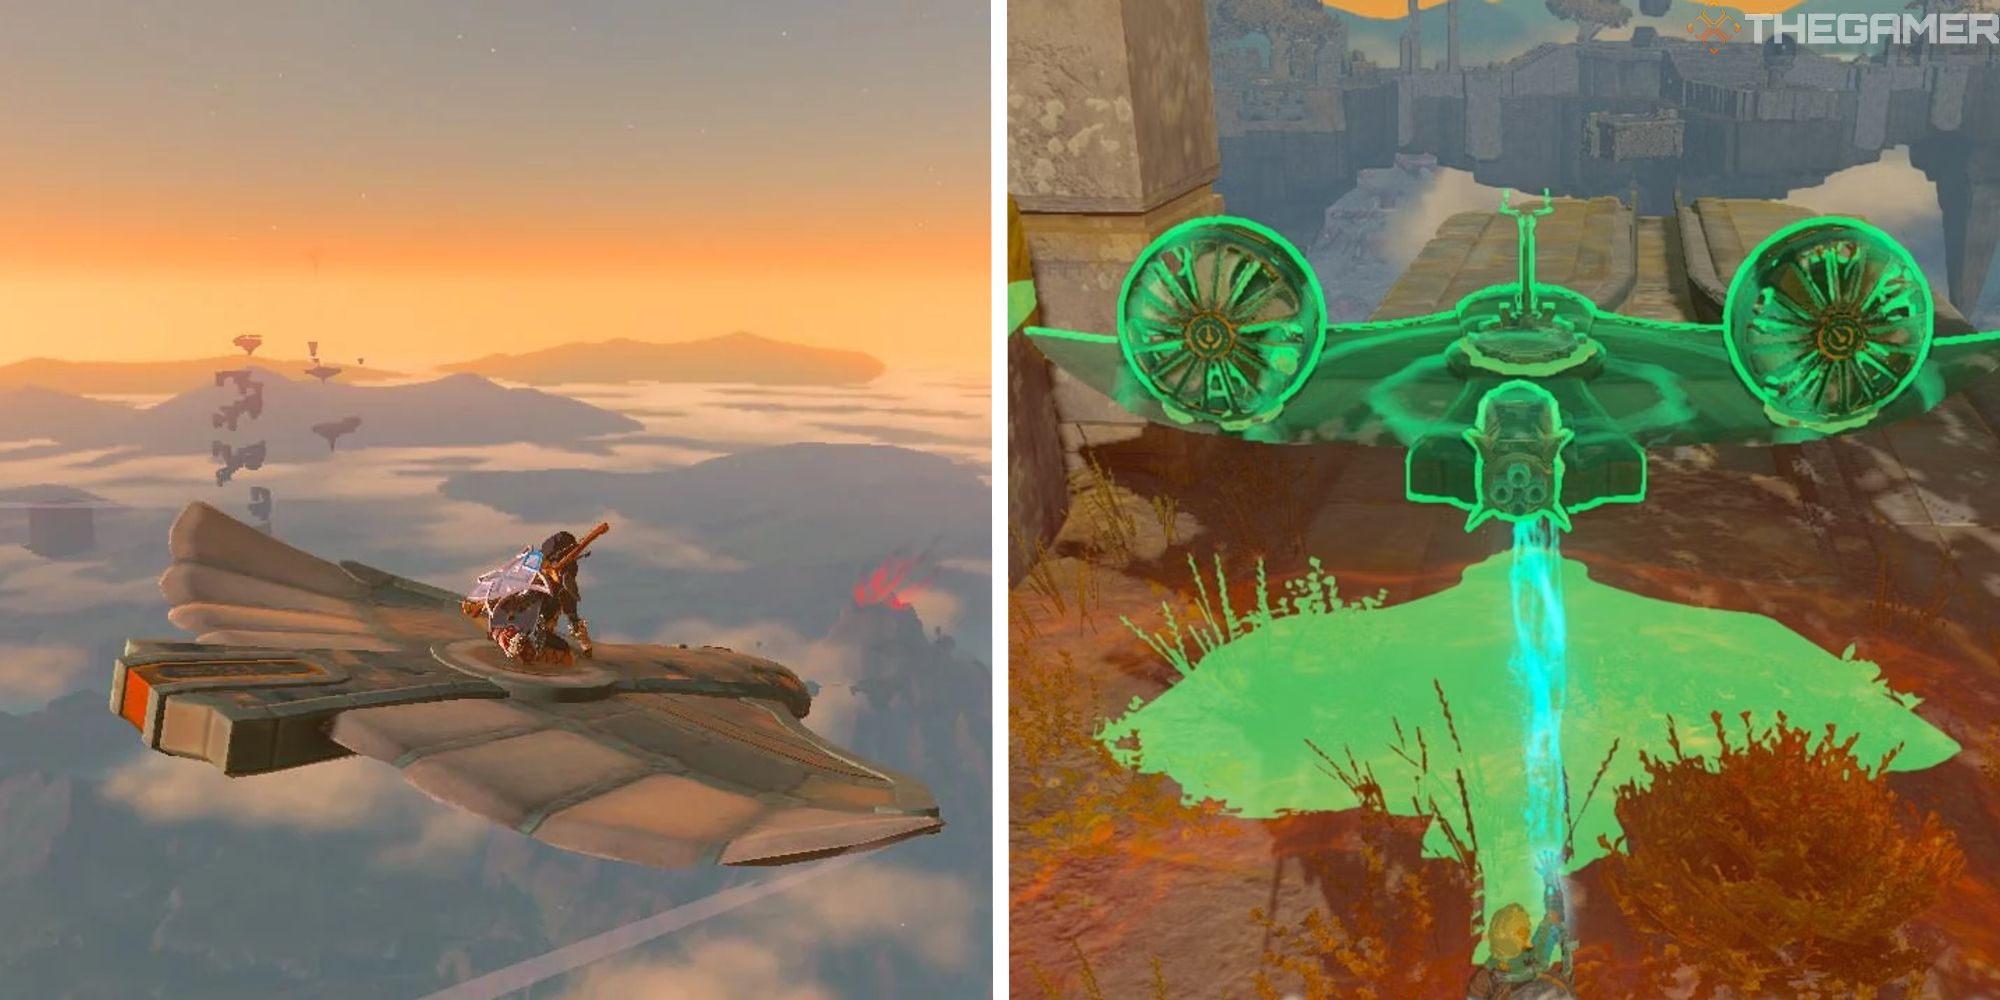 tears of the kingdom split image showing player ride a zonai wing next to image of player placing a fanplane